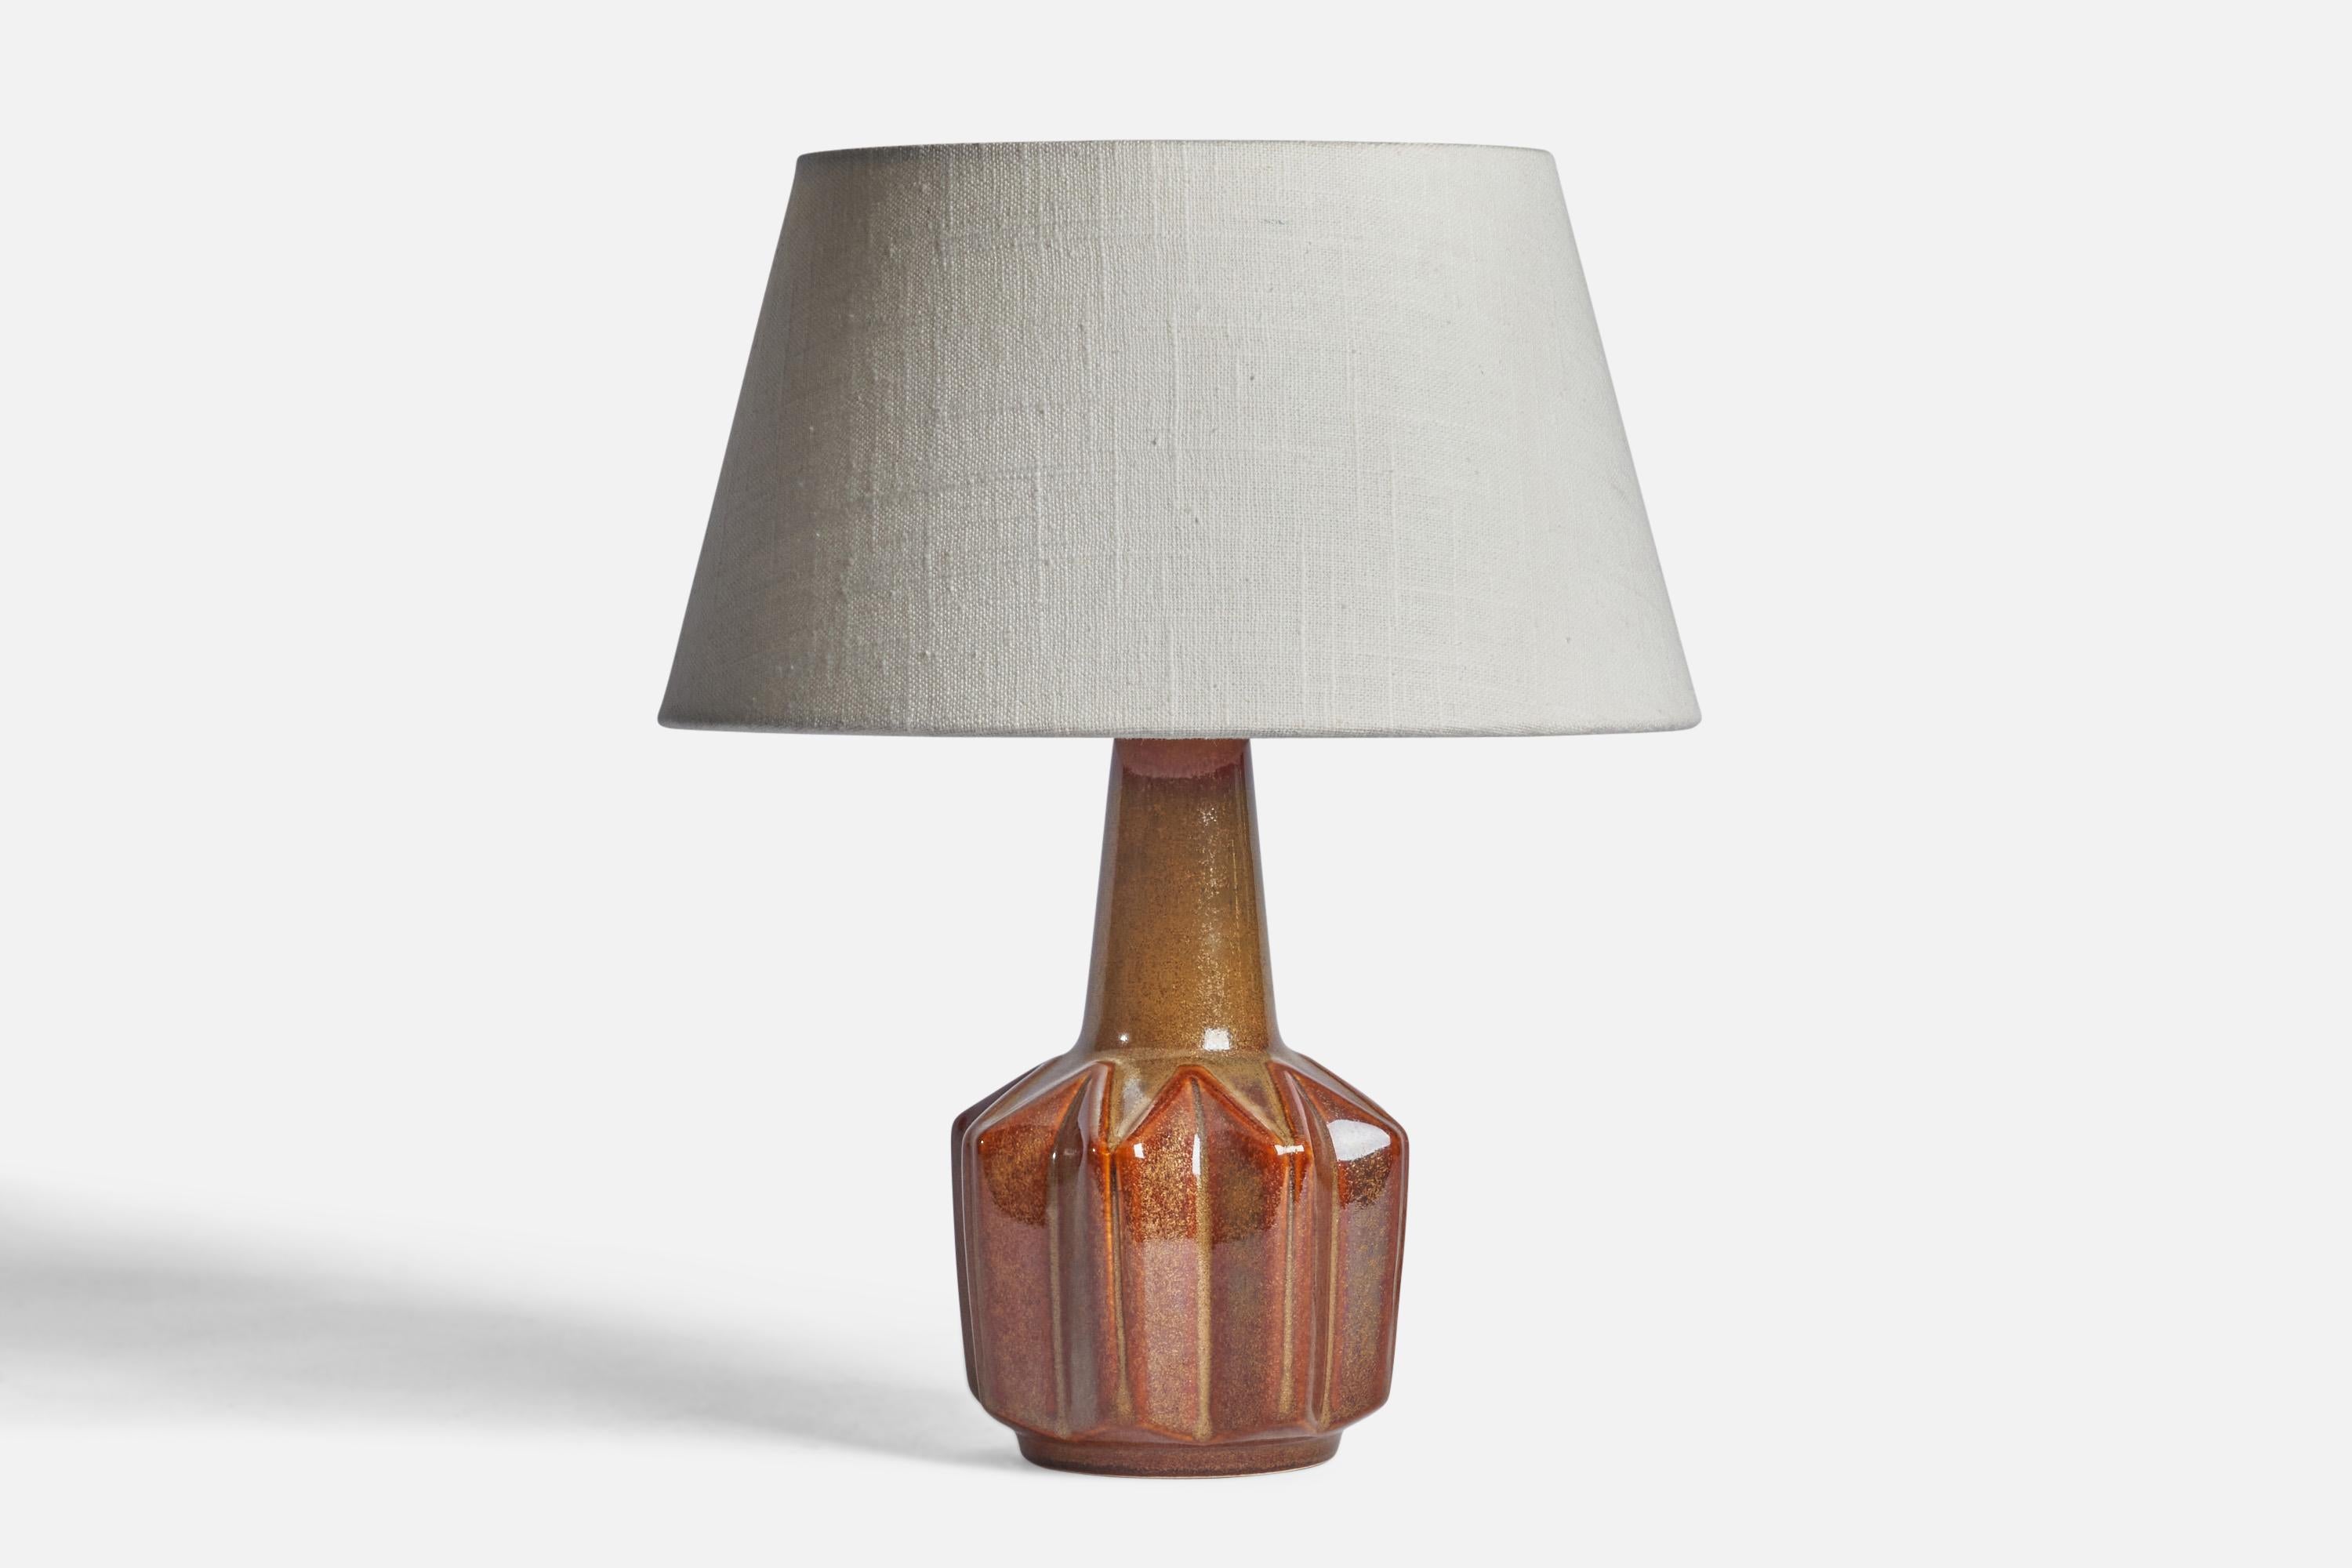 A brown-glazed stoneware table lamp designed and produced by Søholm, Bornholm, Denmark, 1960s.

Dimensions of Lamp (inches): 9.5” H x 4.25” Diameter
Dimensions of Shade (inches): 7” Top Diameter x 10” Bottom Diameter x 5.5” H 
Dimensions of Lamp